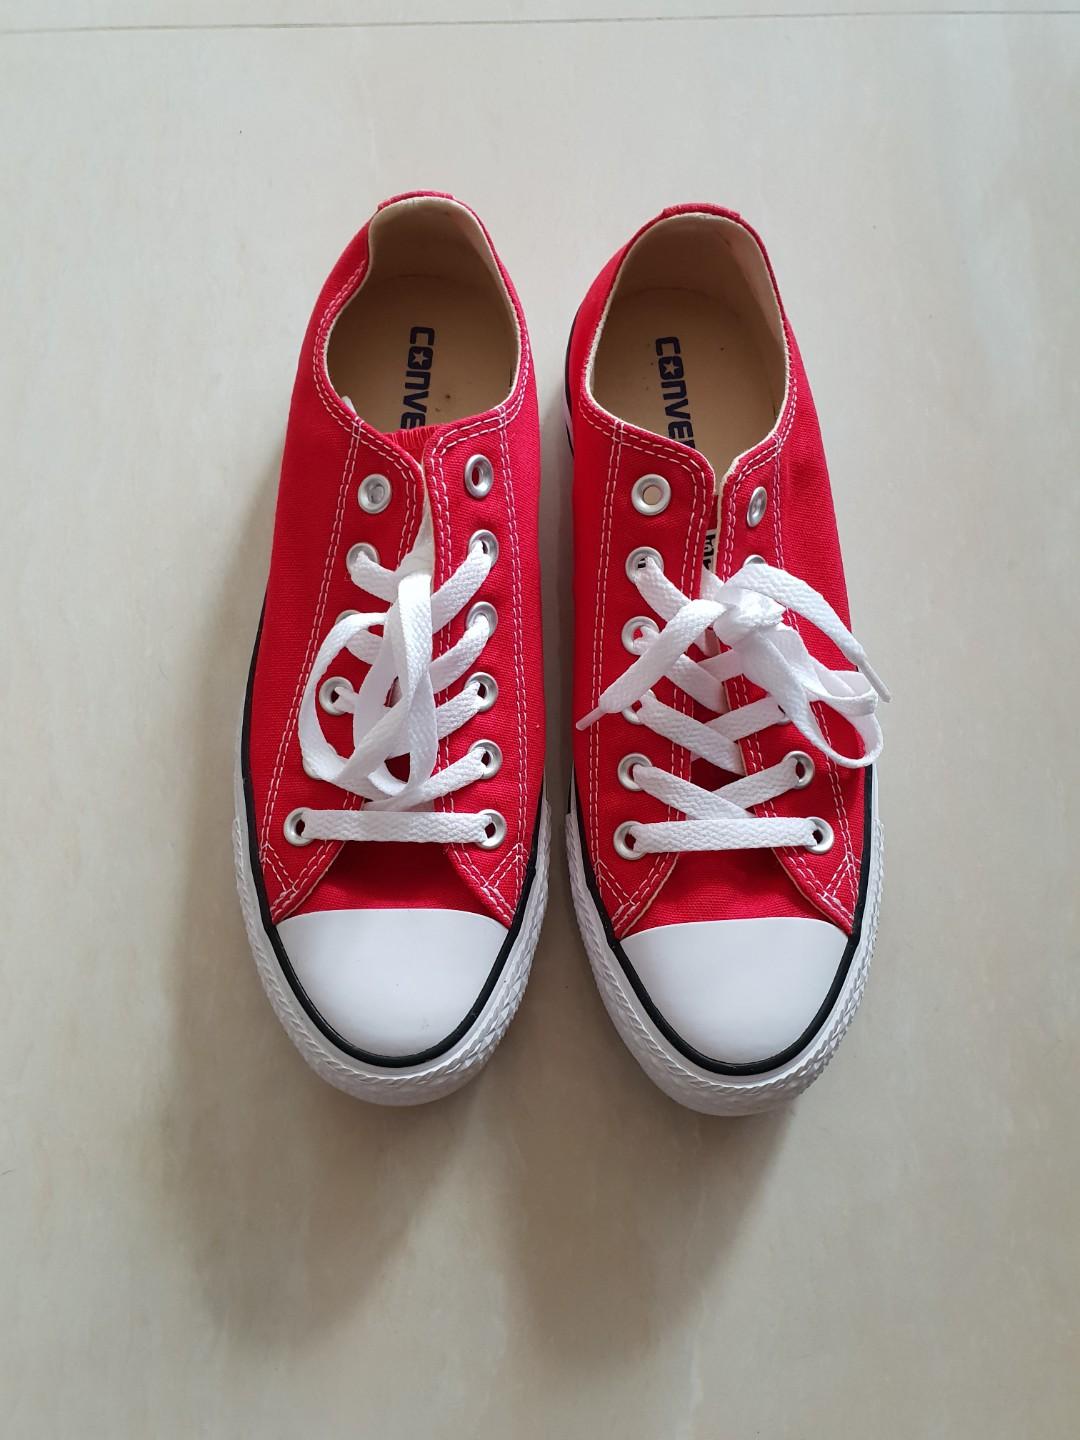 new red converse